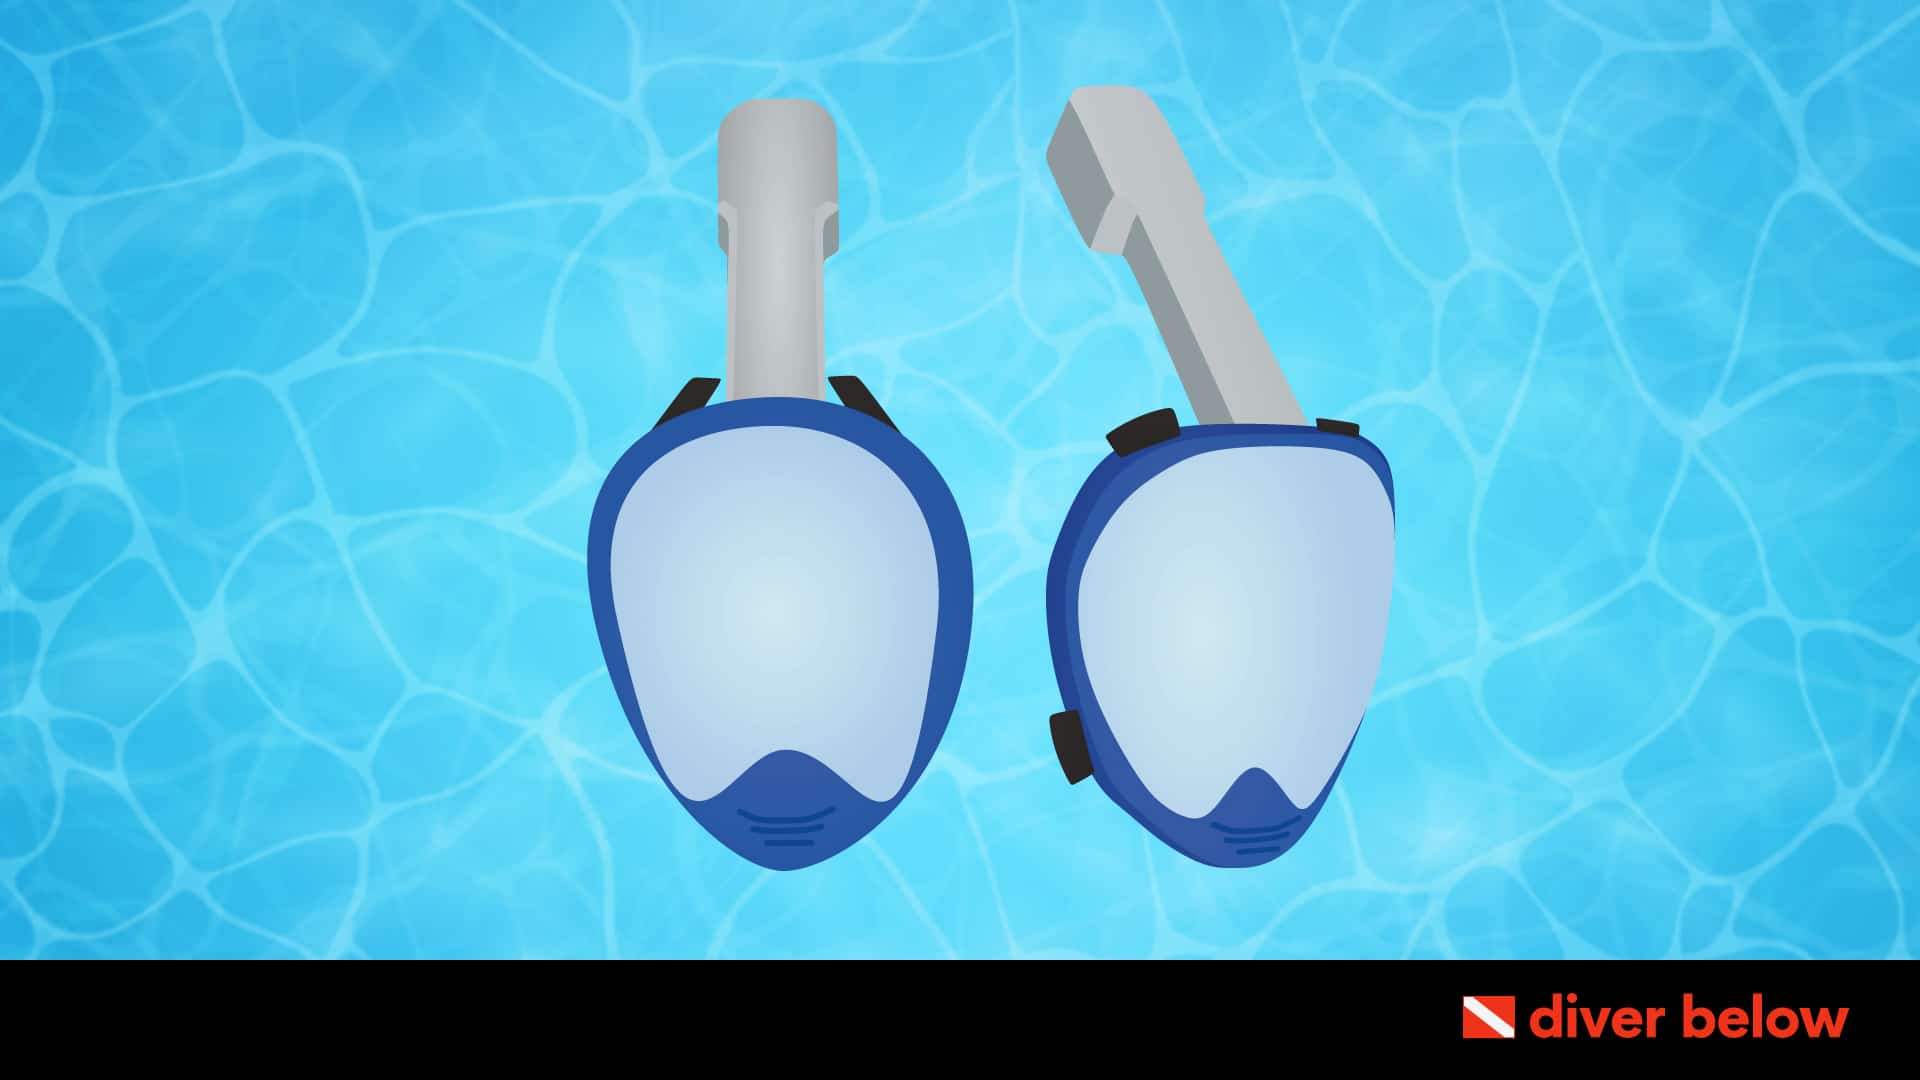 vector graphic showing two full face snorkel masks side by side surrounded by ocean water